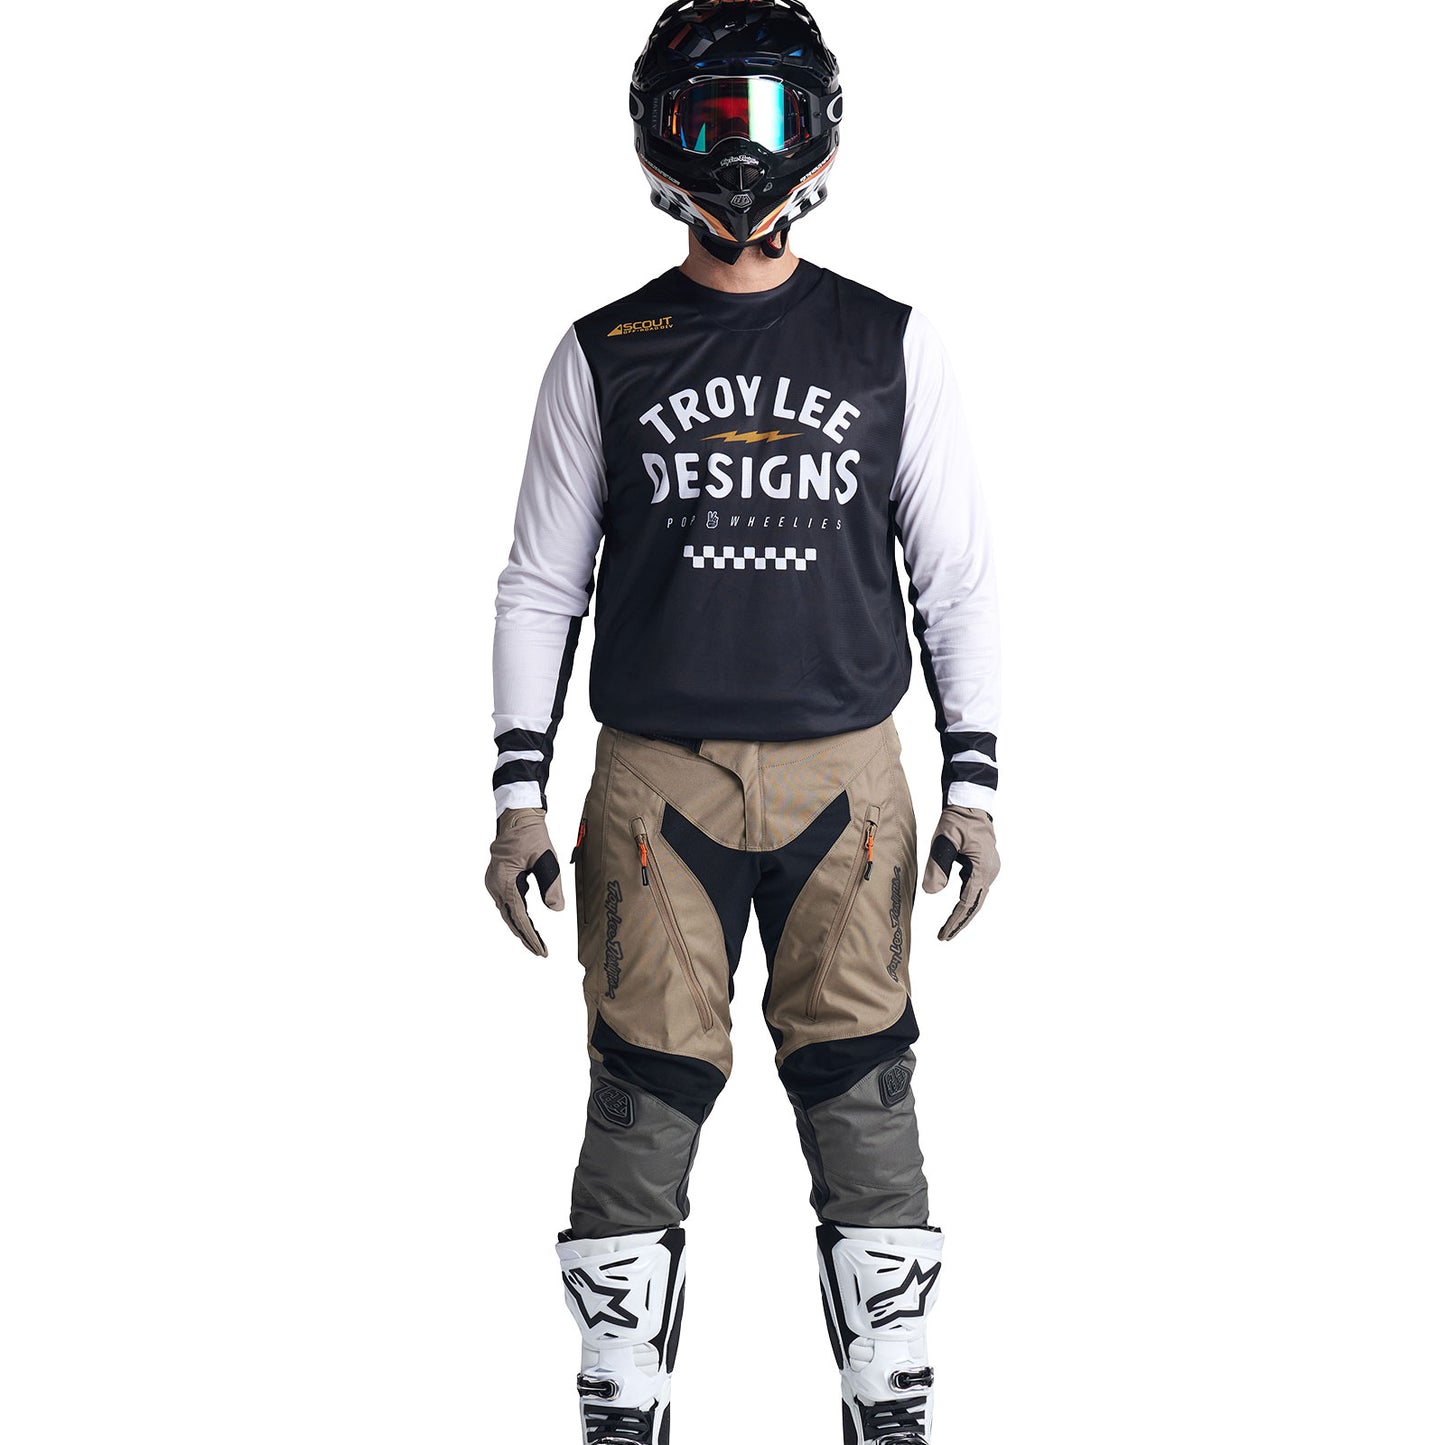 Scout GP Jersey Ride On Black / White